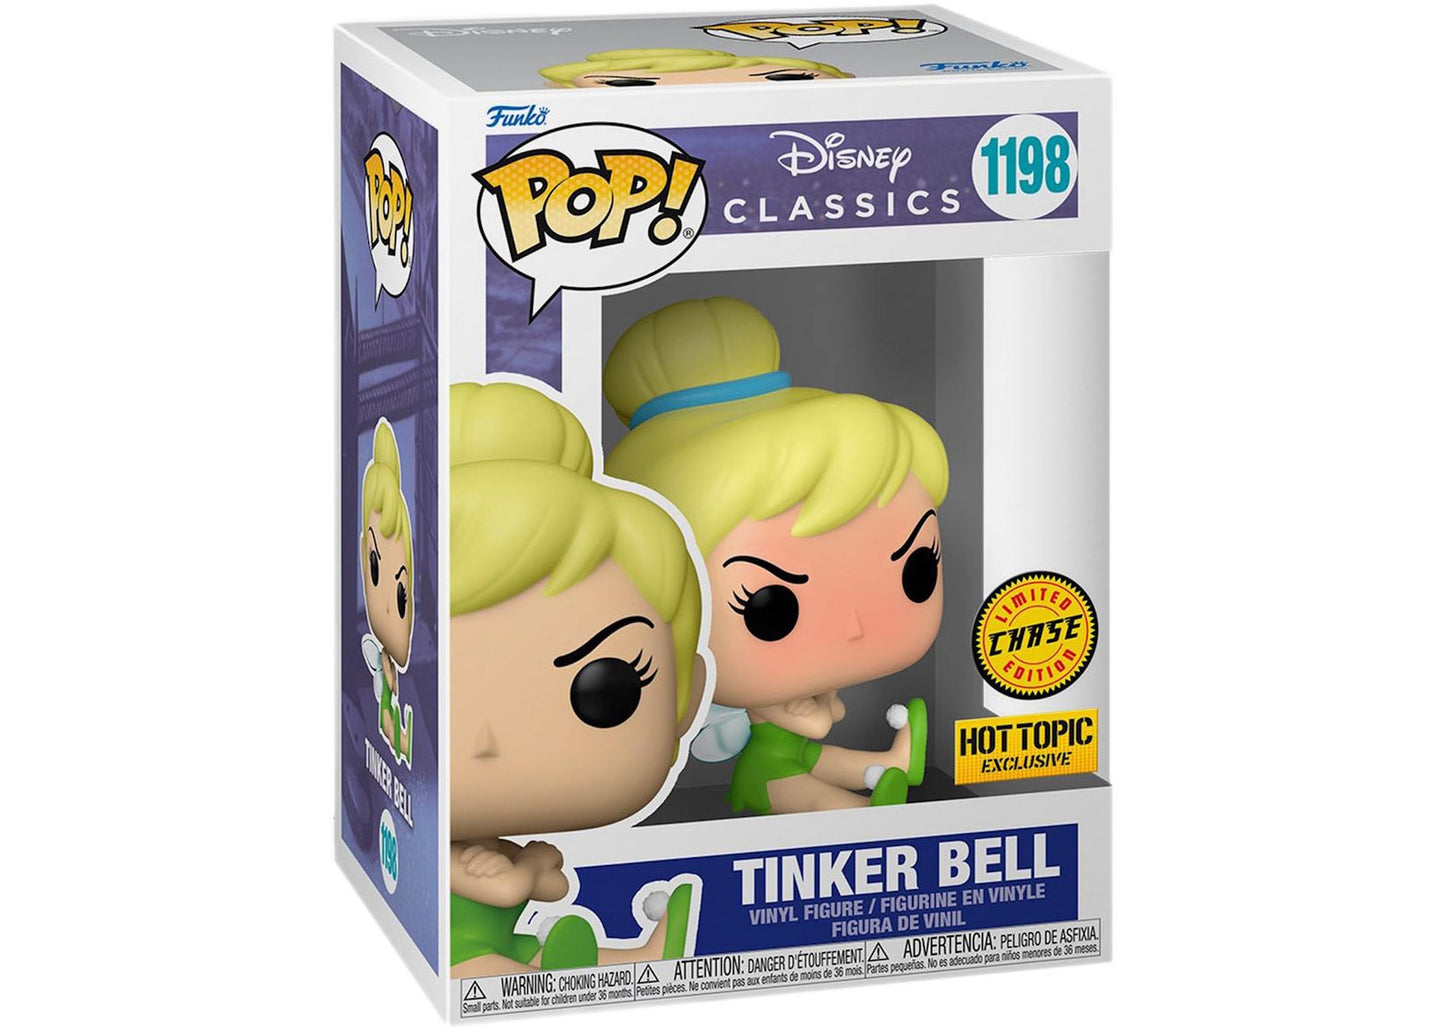 Funko Pop! Disney Classics Tinker Bell 1198 CHASE Hot Topic Exclusive + Free Protector